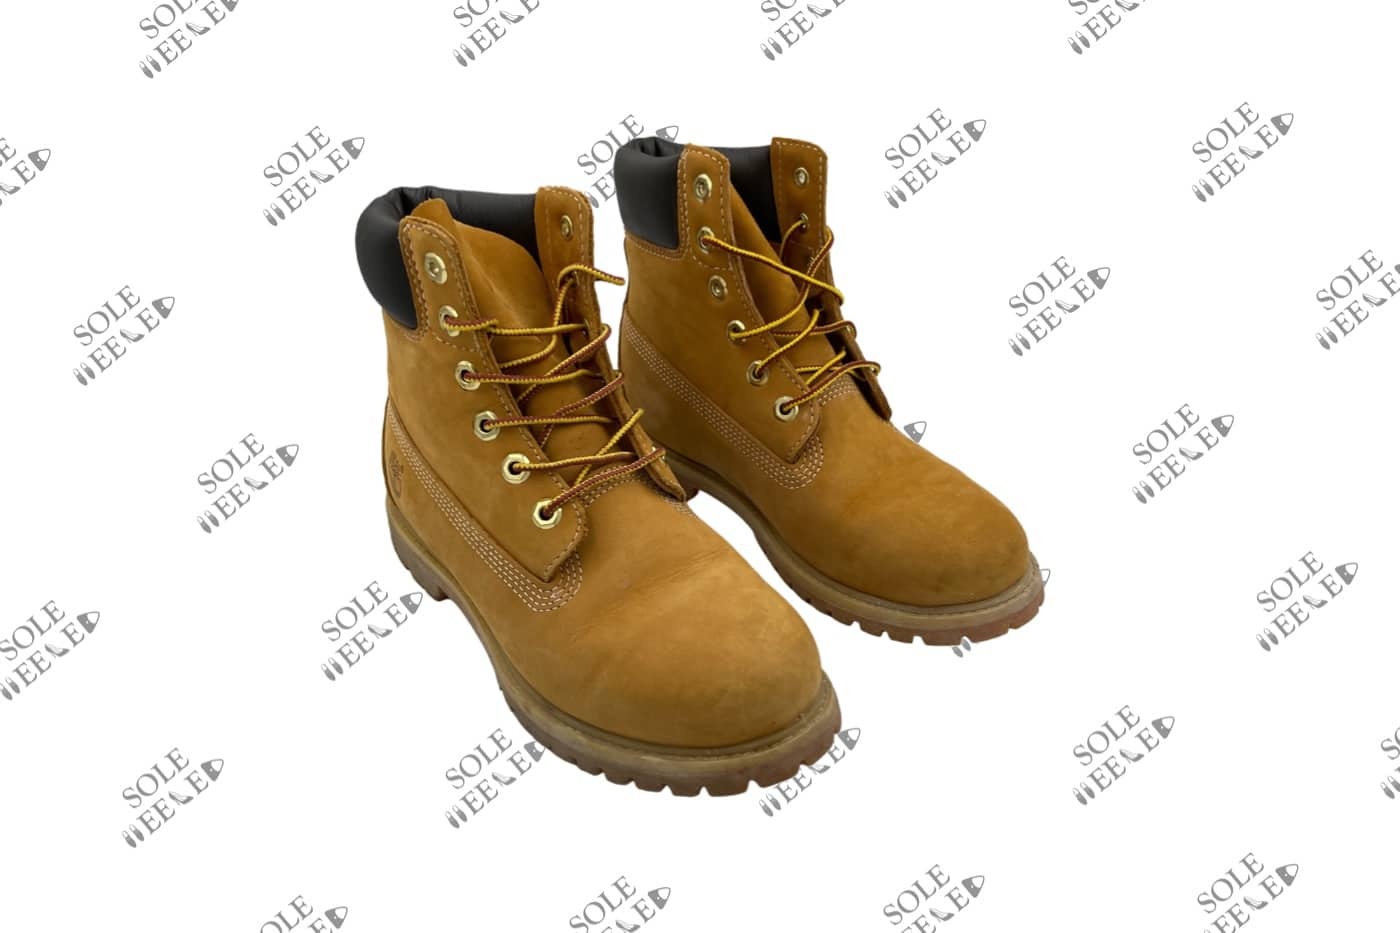 Timberland Boot Cleaning and Stain Treatment